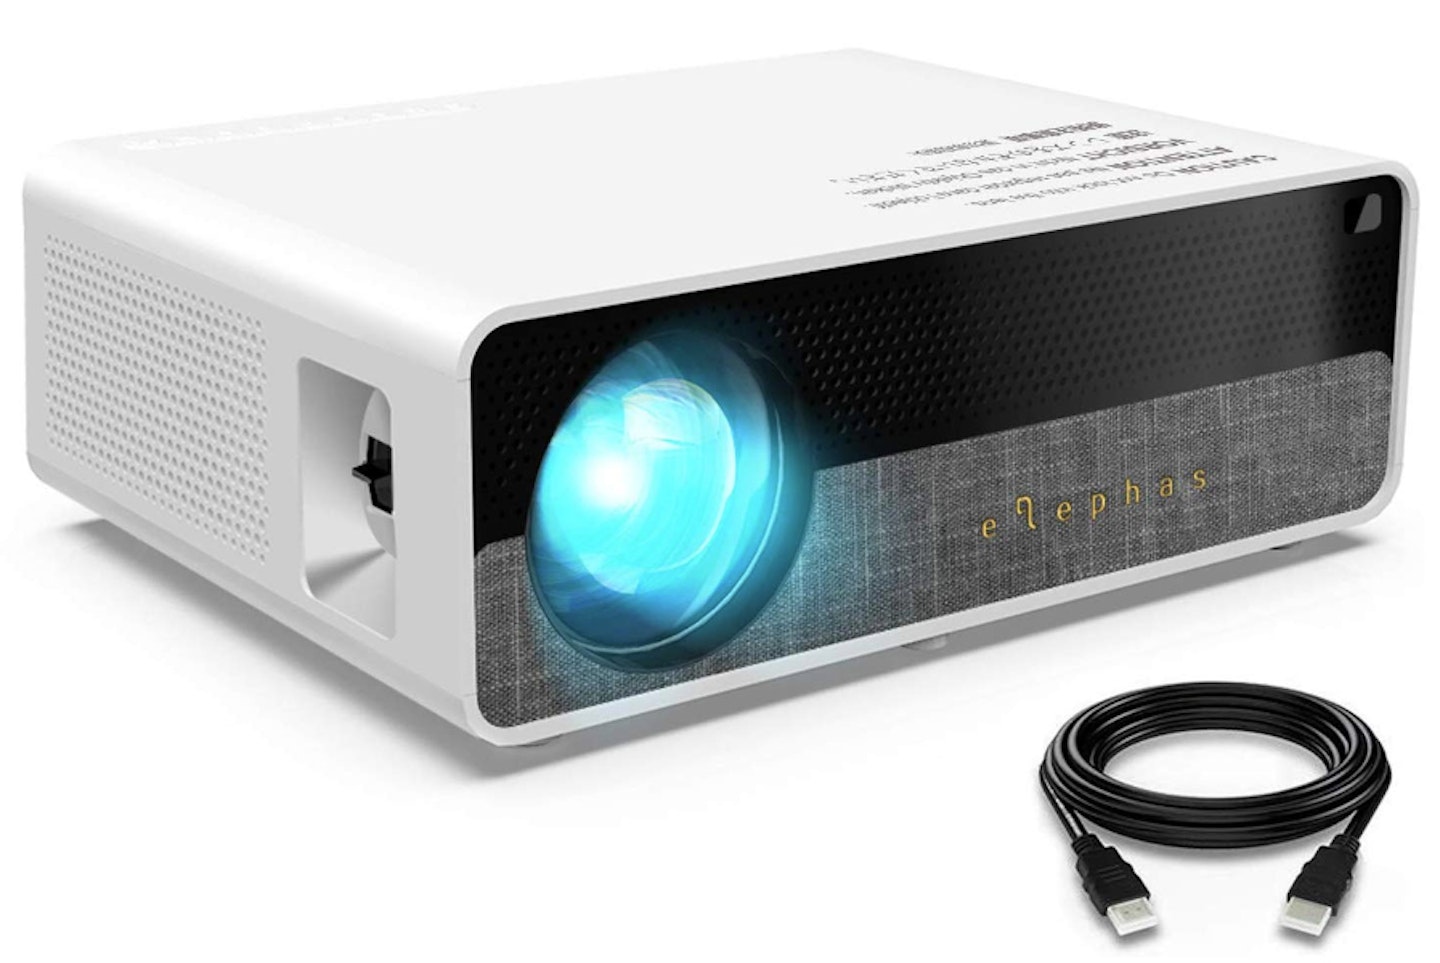 ELEPHAS Projector Q9 Native 1080P HD Video Projector